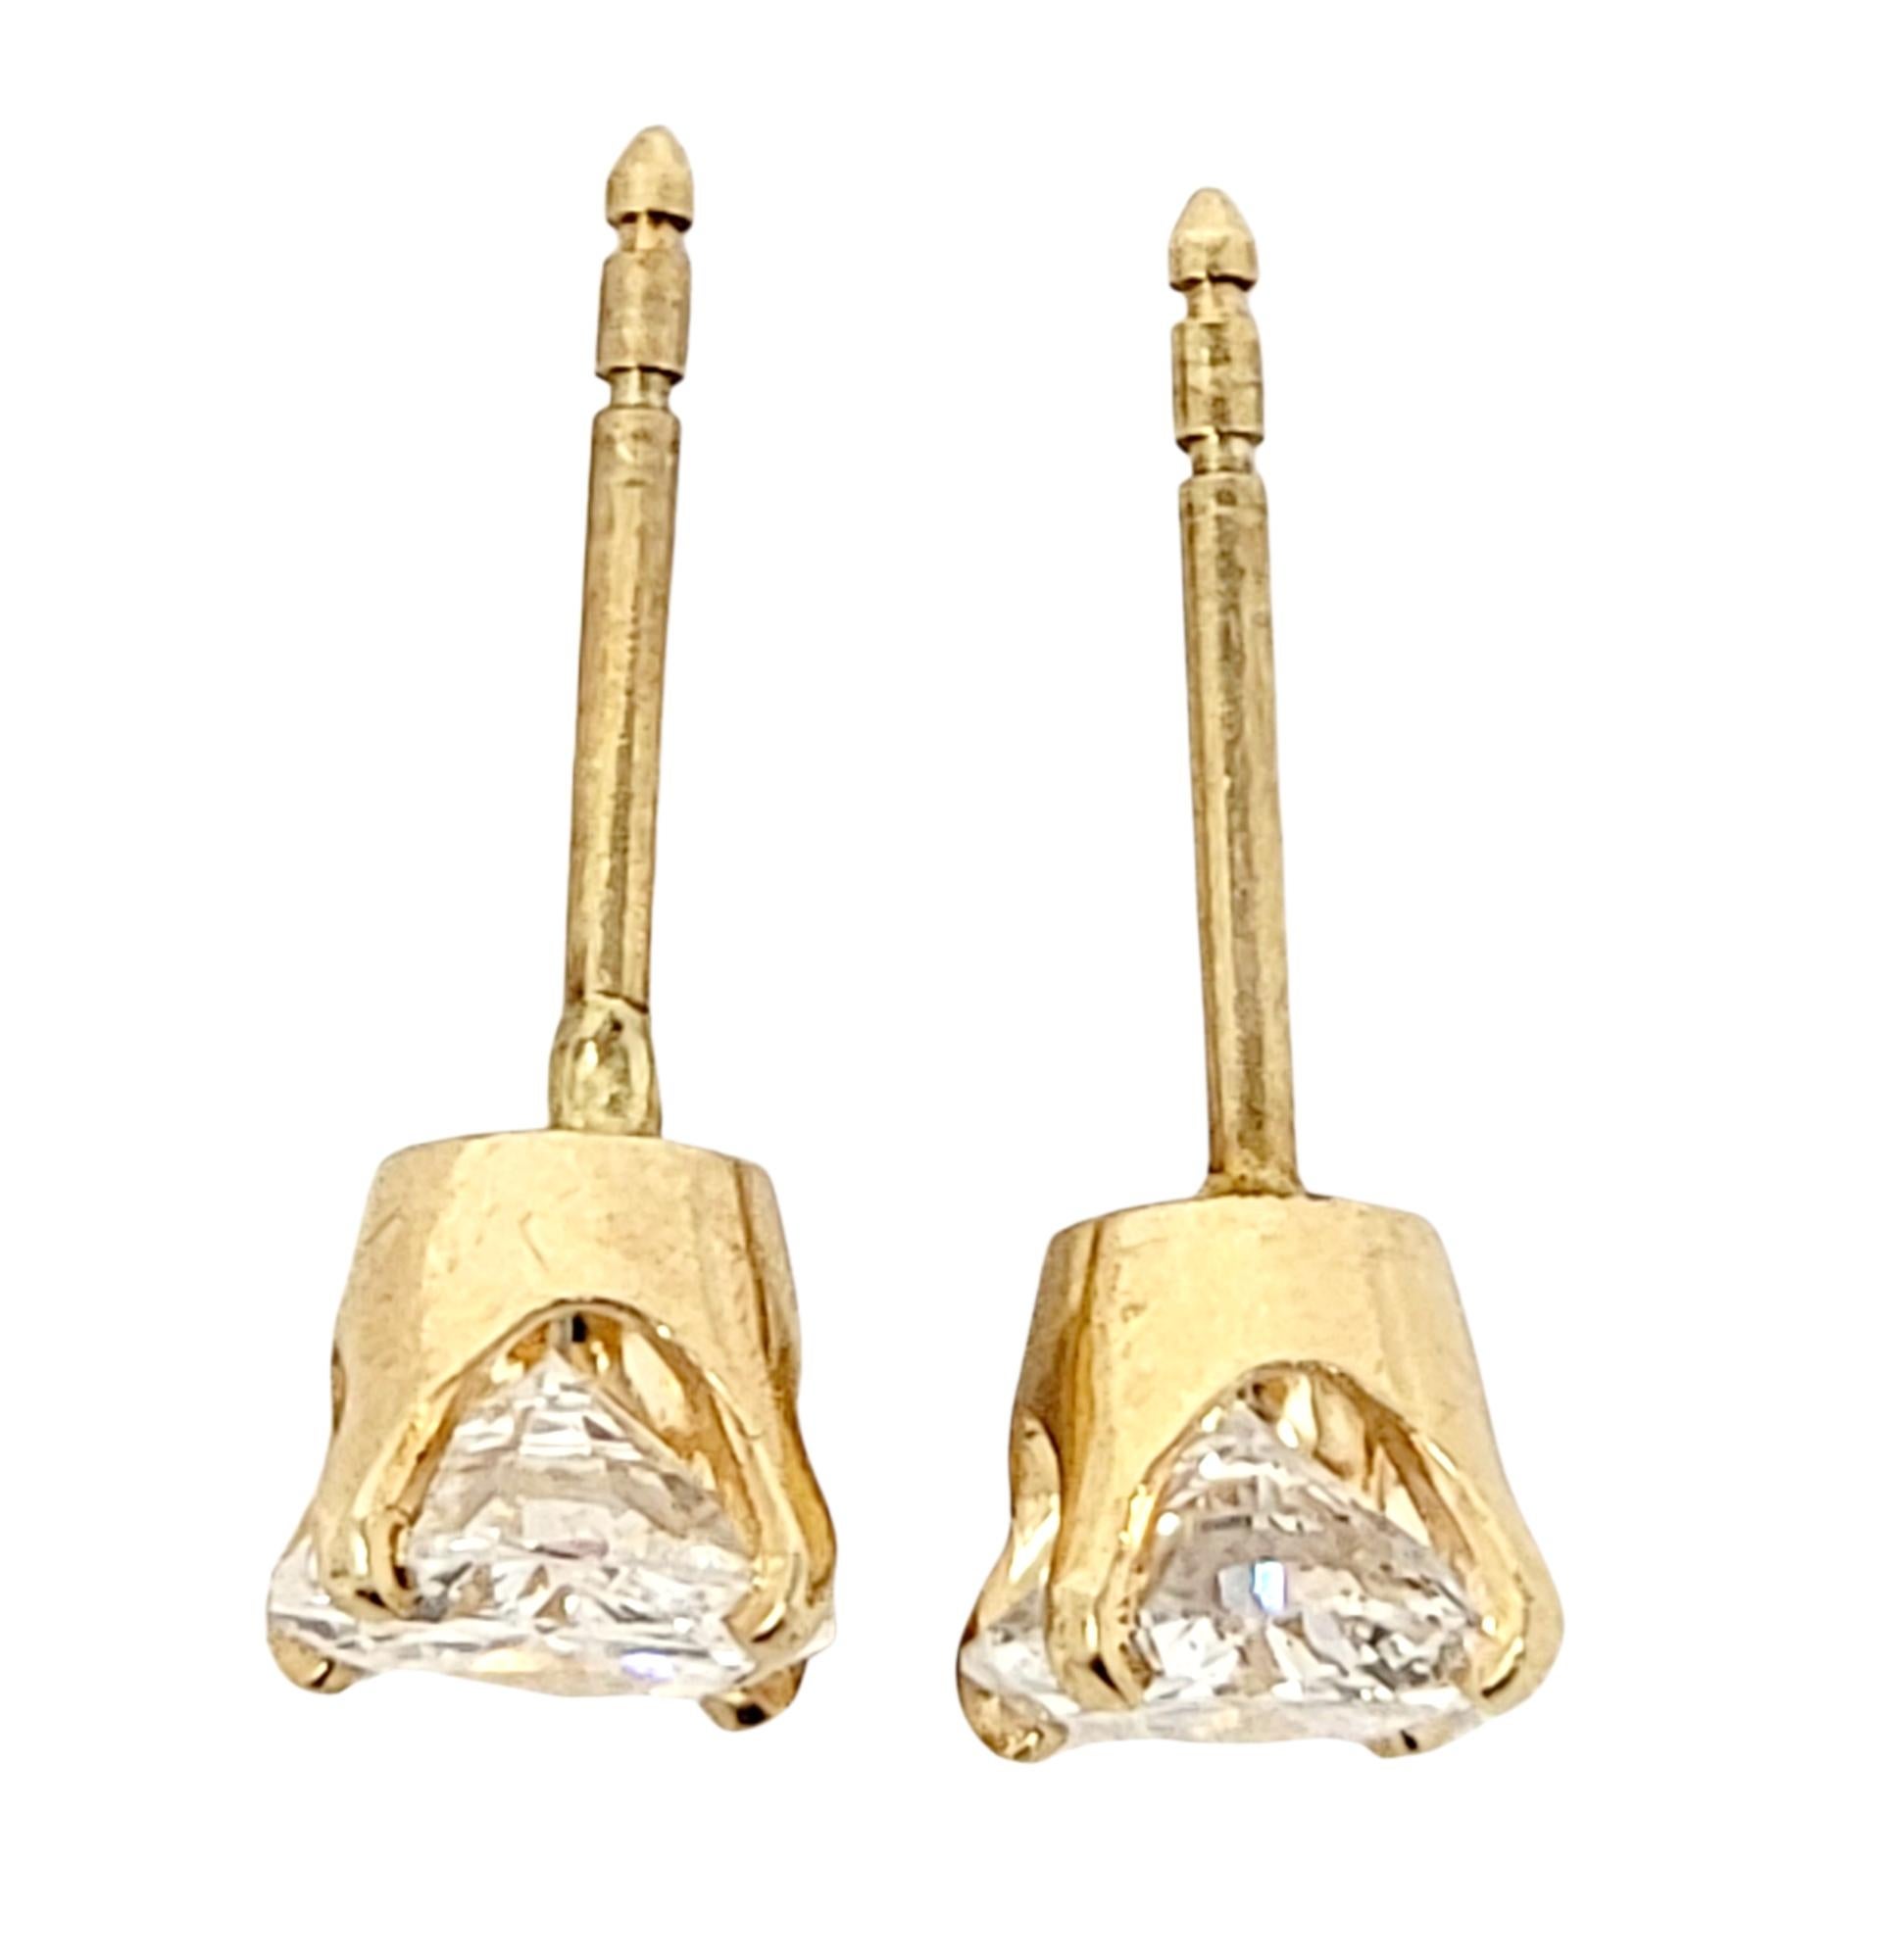 1.10 Carat Total Round Brilliant Solitaire Diamond Stud Earrings in Yellow Gold 2